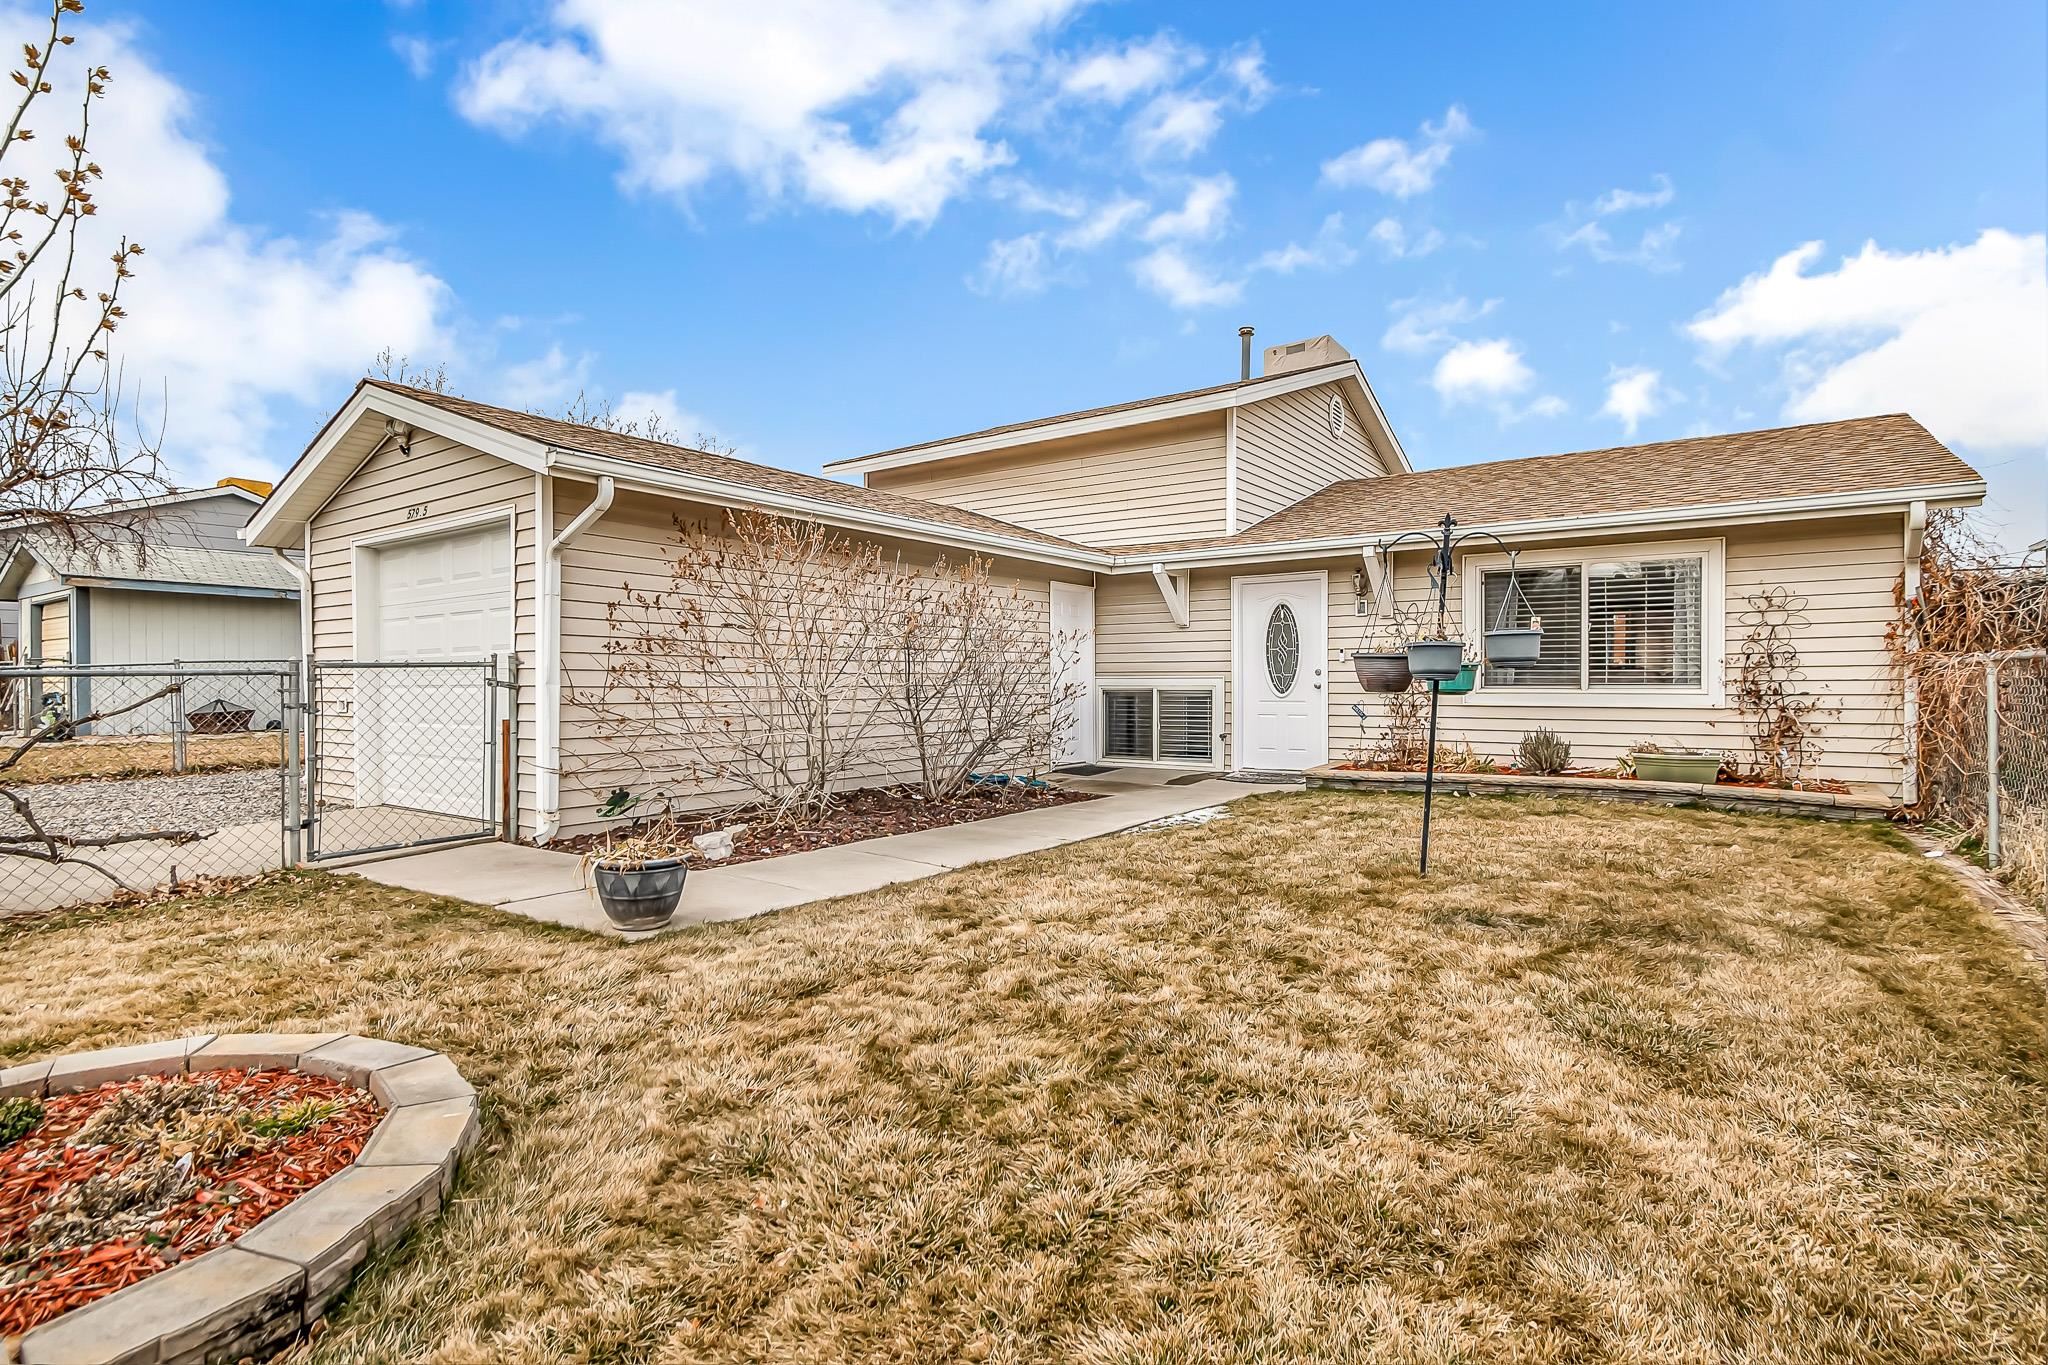 579 1/2 Clifton Way, Grand Junction, CO 81504